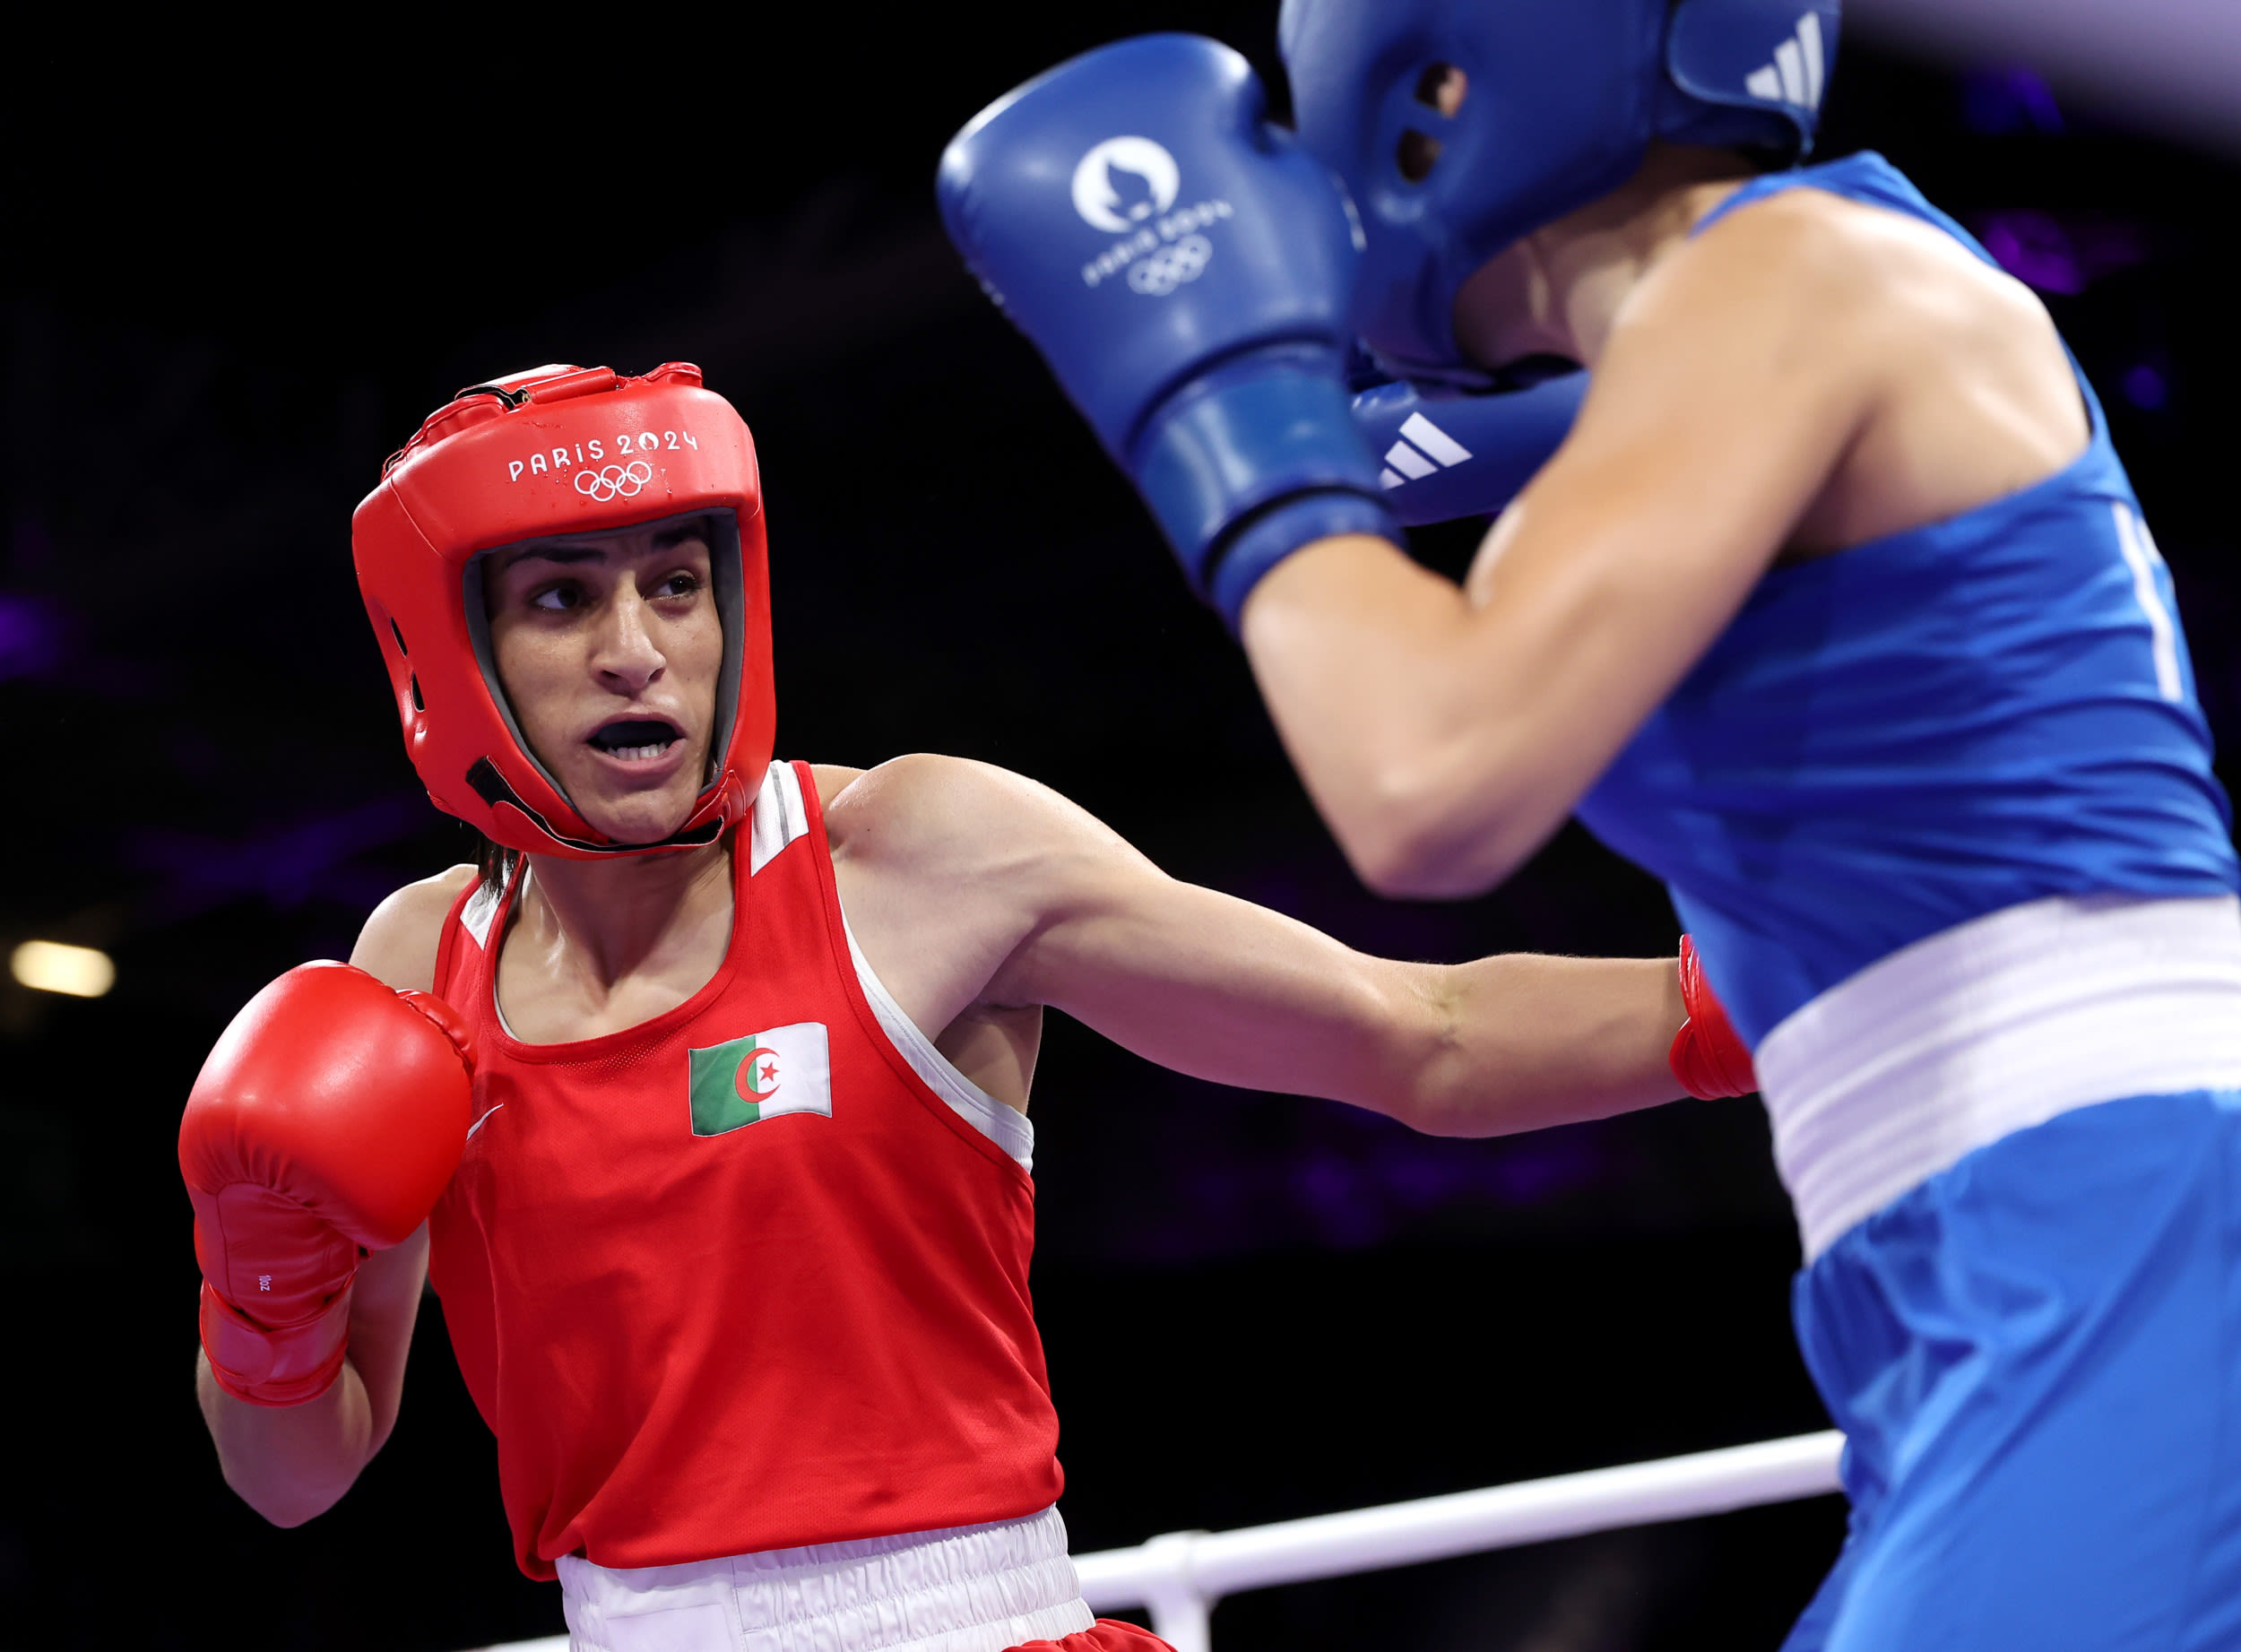 MAGA rages at Olympics boxer who failed gender eligibility test